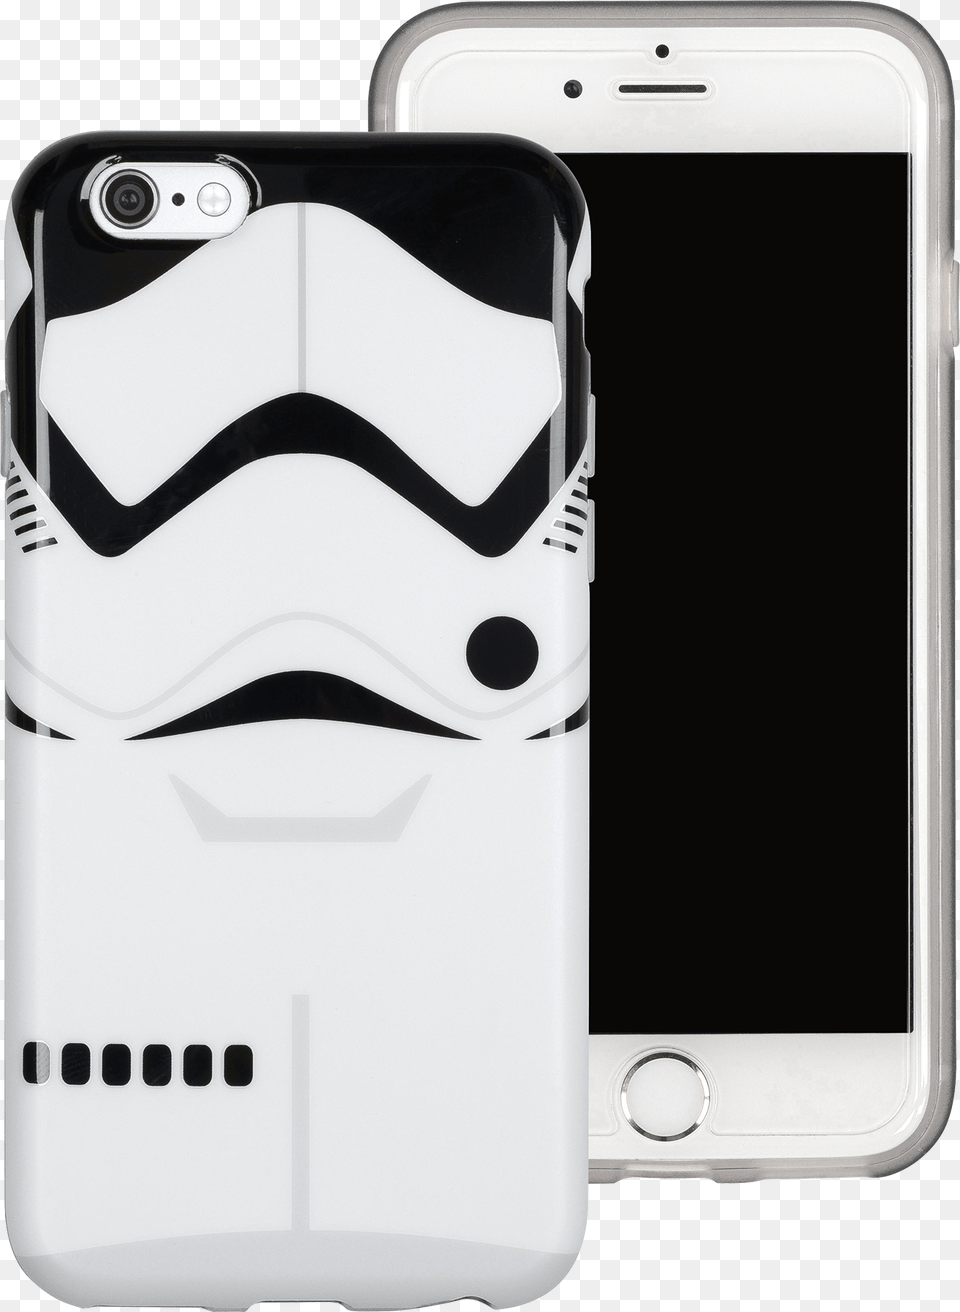 Star Wars Tfa Stormtrooper Iphone 66s Cover Iphone 6 Stormtrooper Cover, Electronics, Mobile Phone, Phone Free Transparent Png